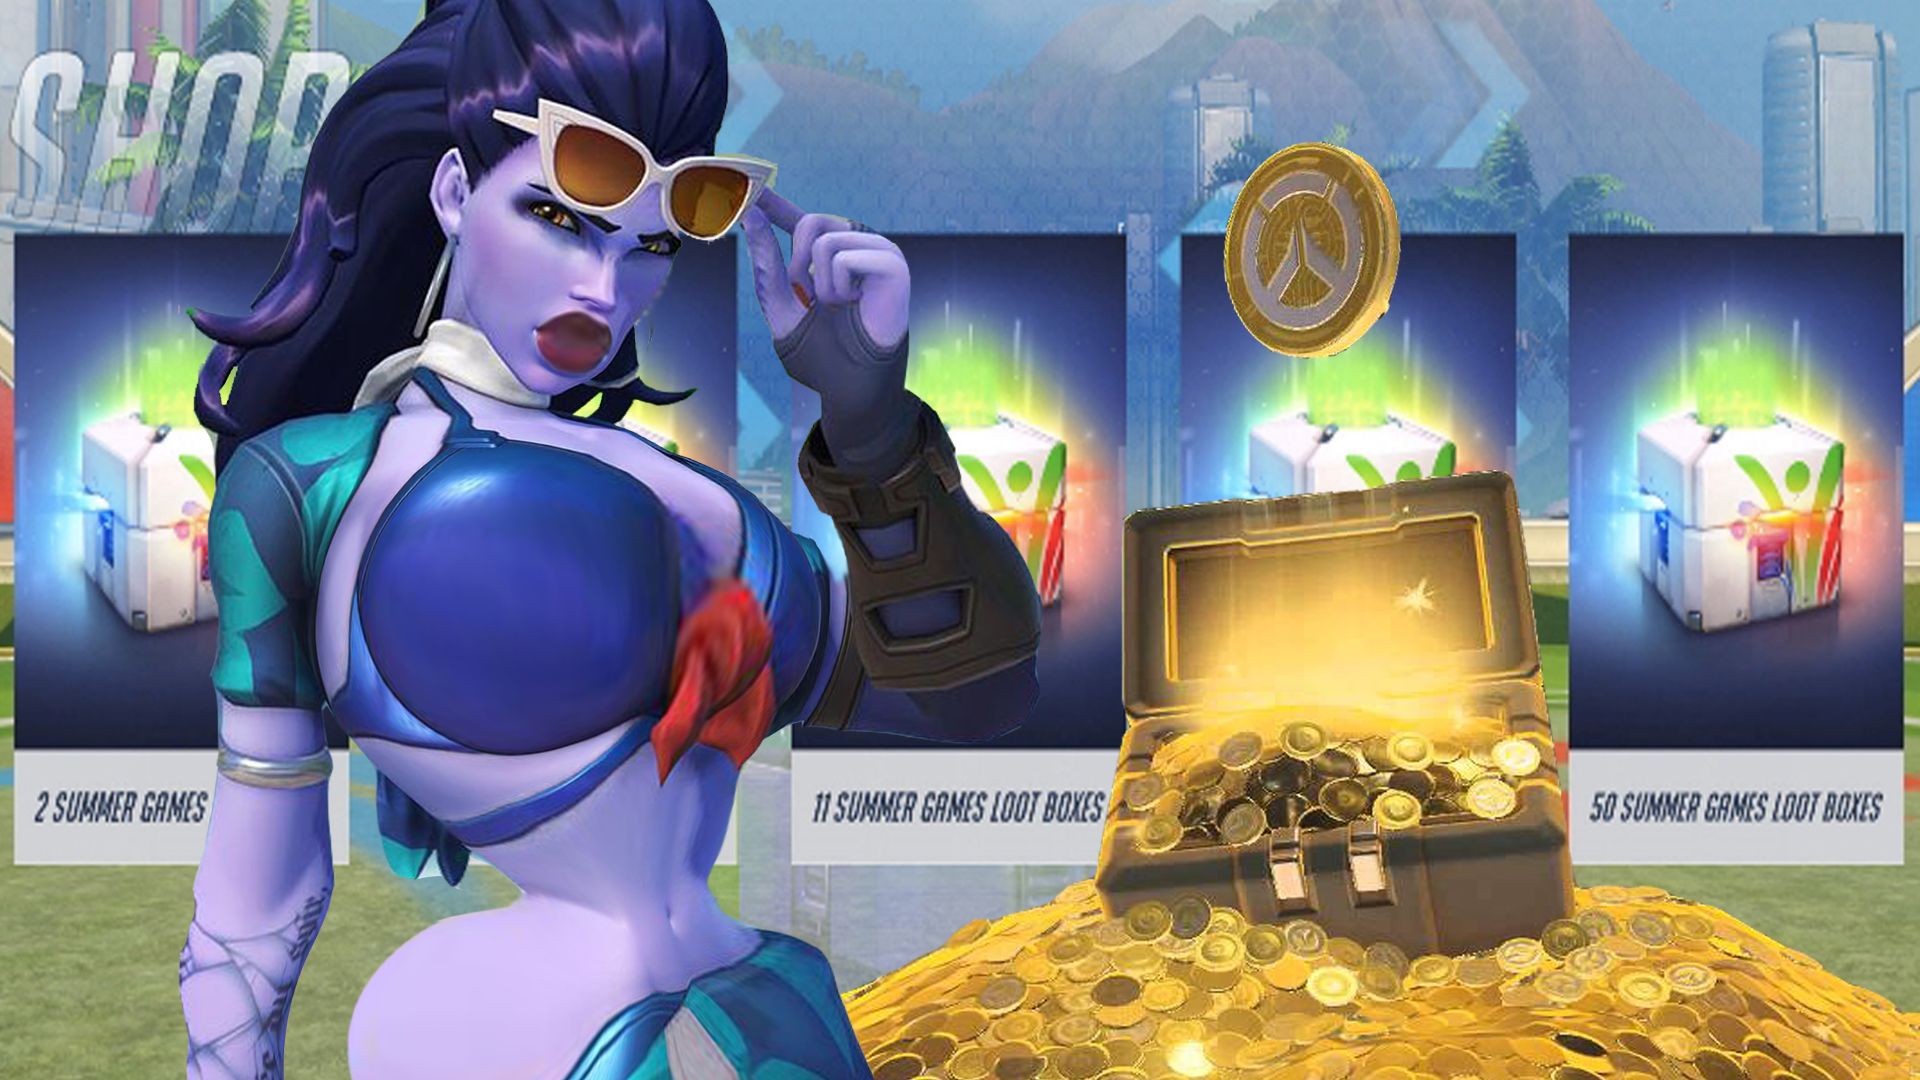 Overwatch's Sexy Summer Update Baffles Players With Bizarre New Gameplay Changes